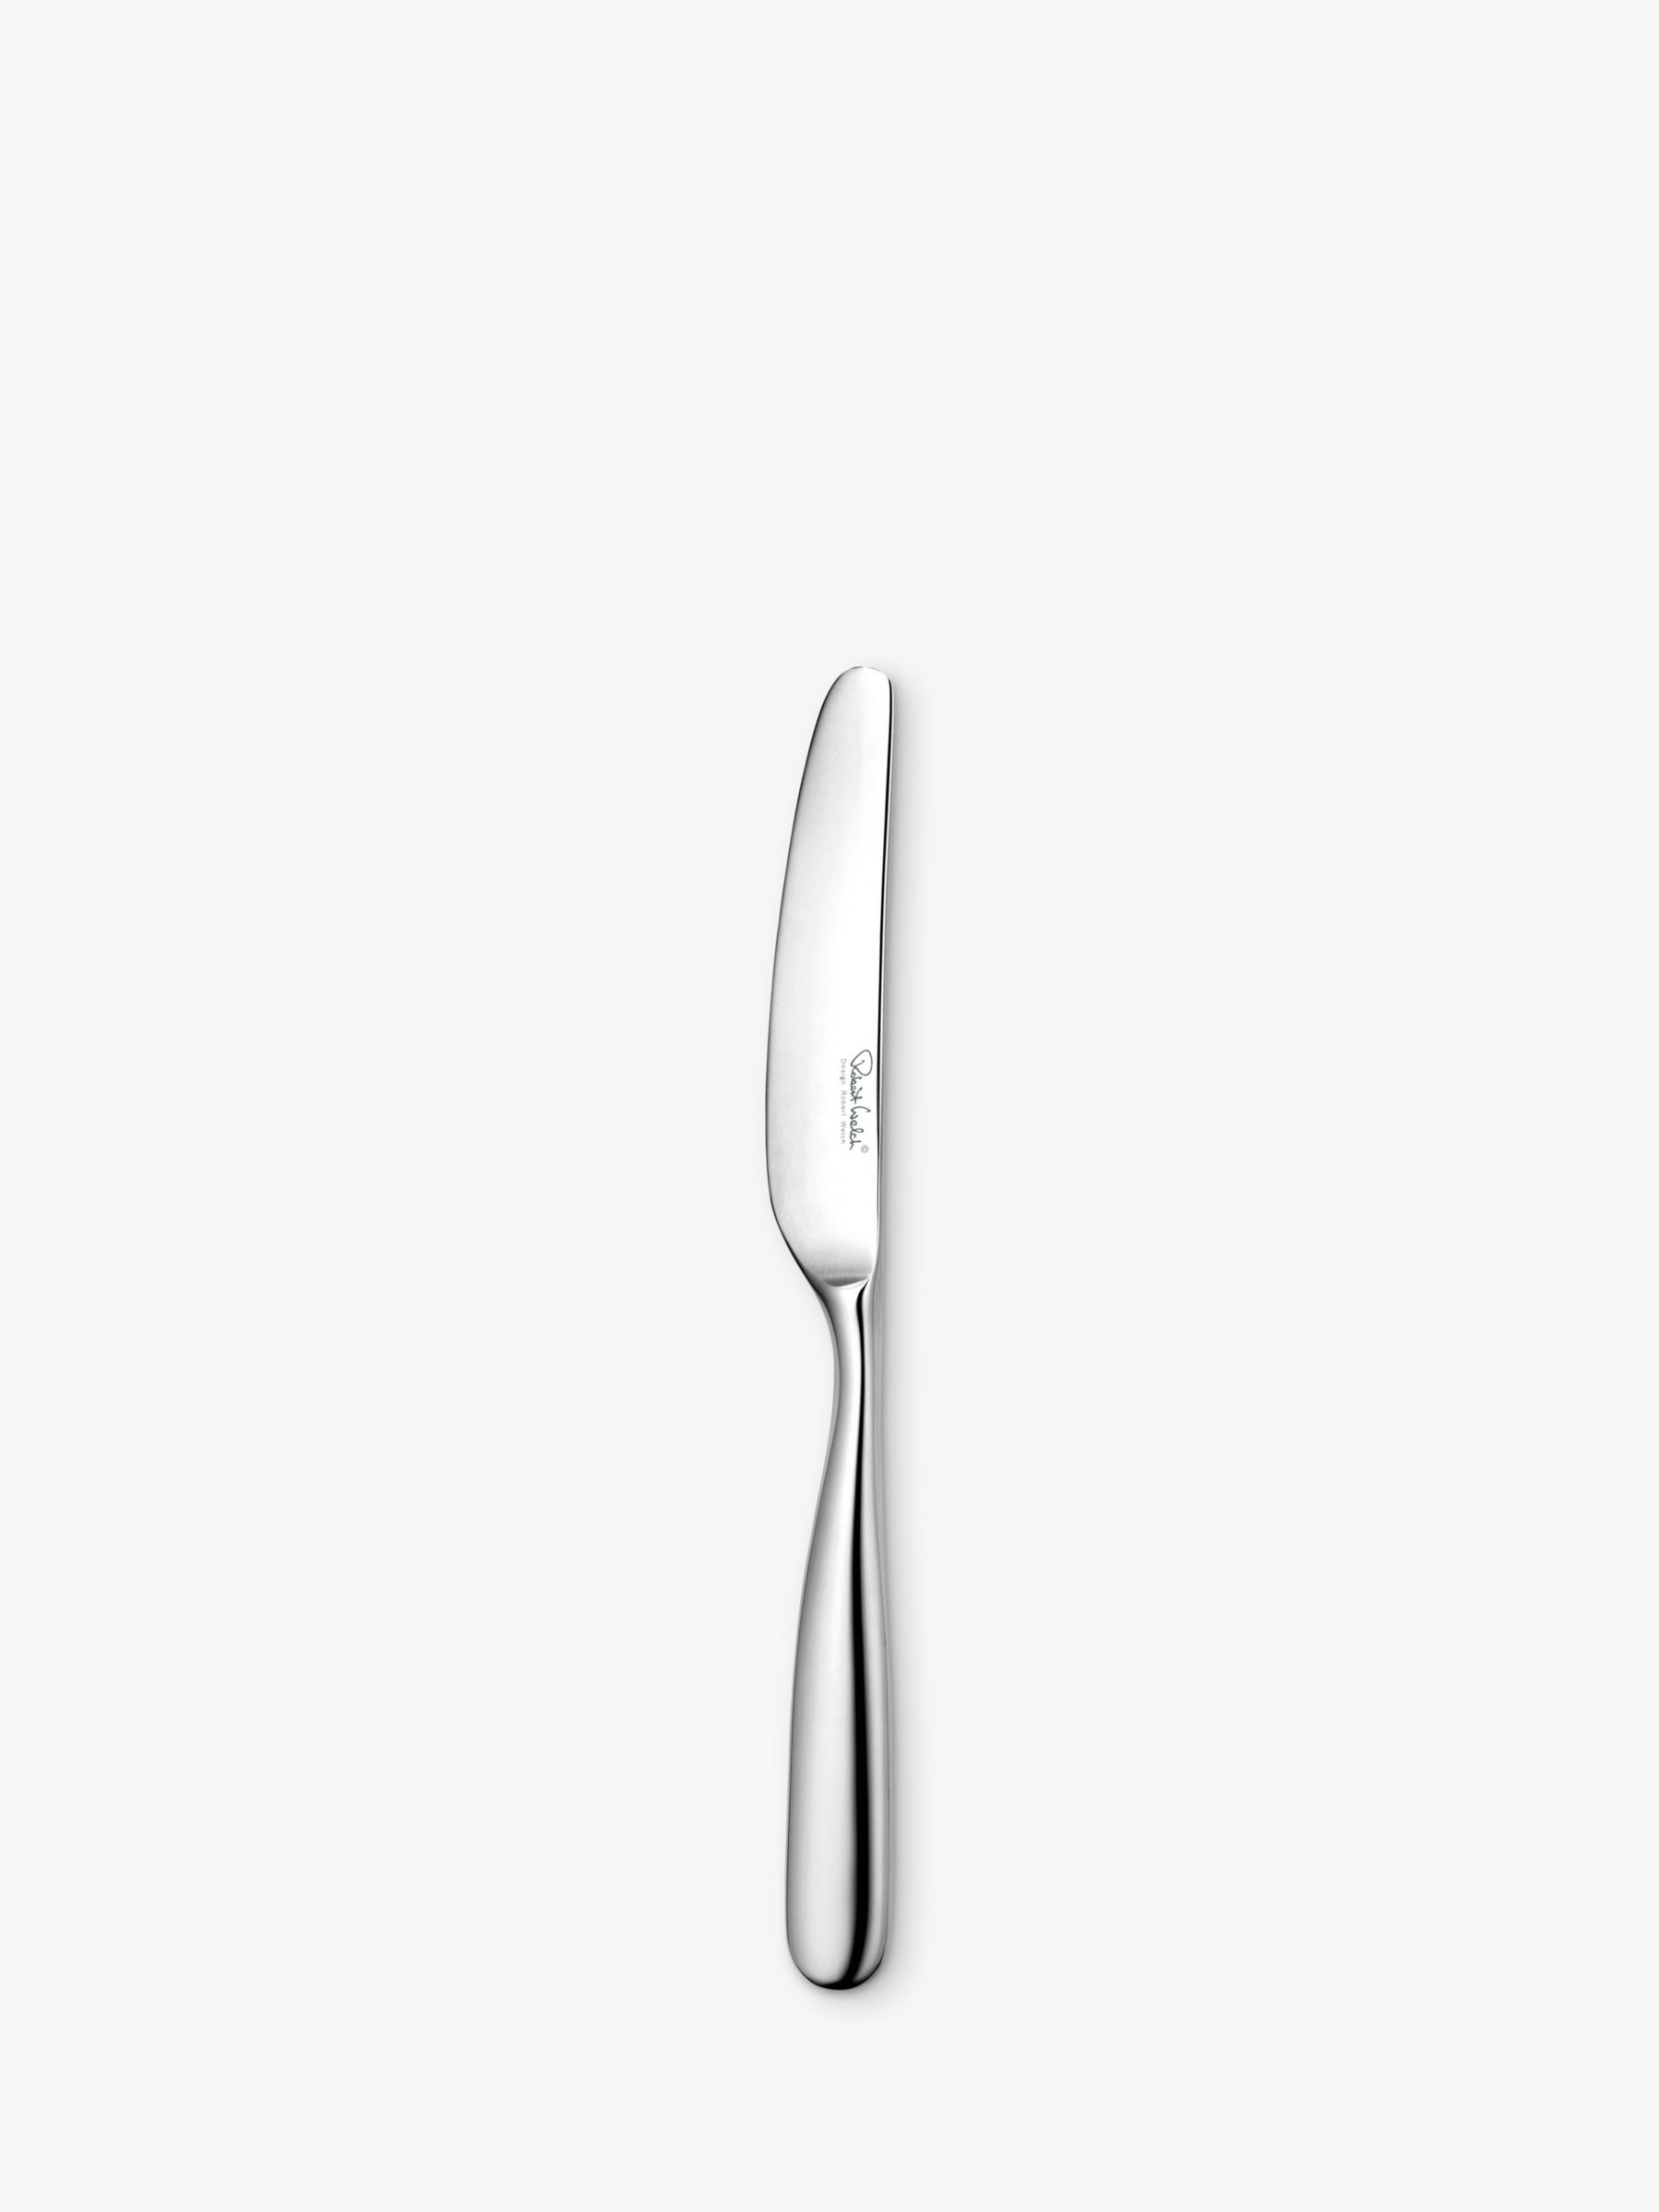 Stanton Table Knife, Stainless Steel